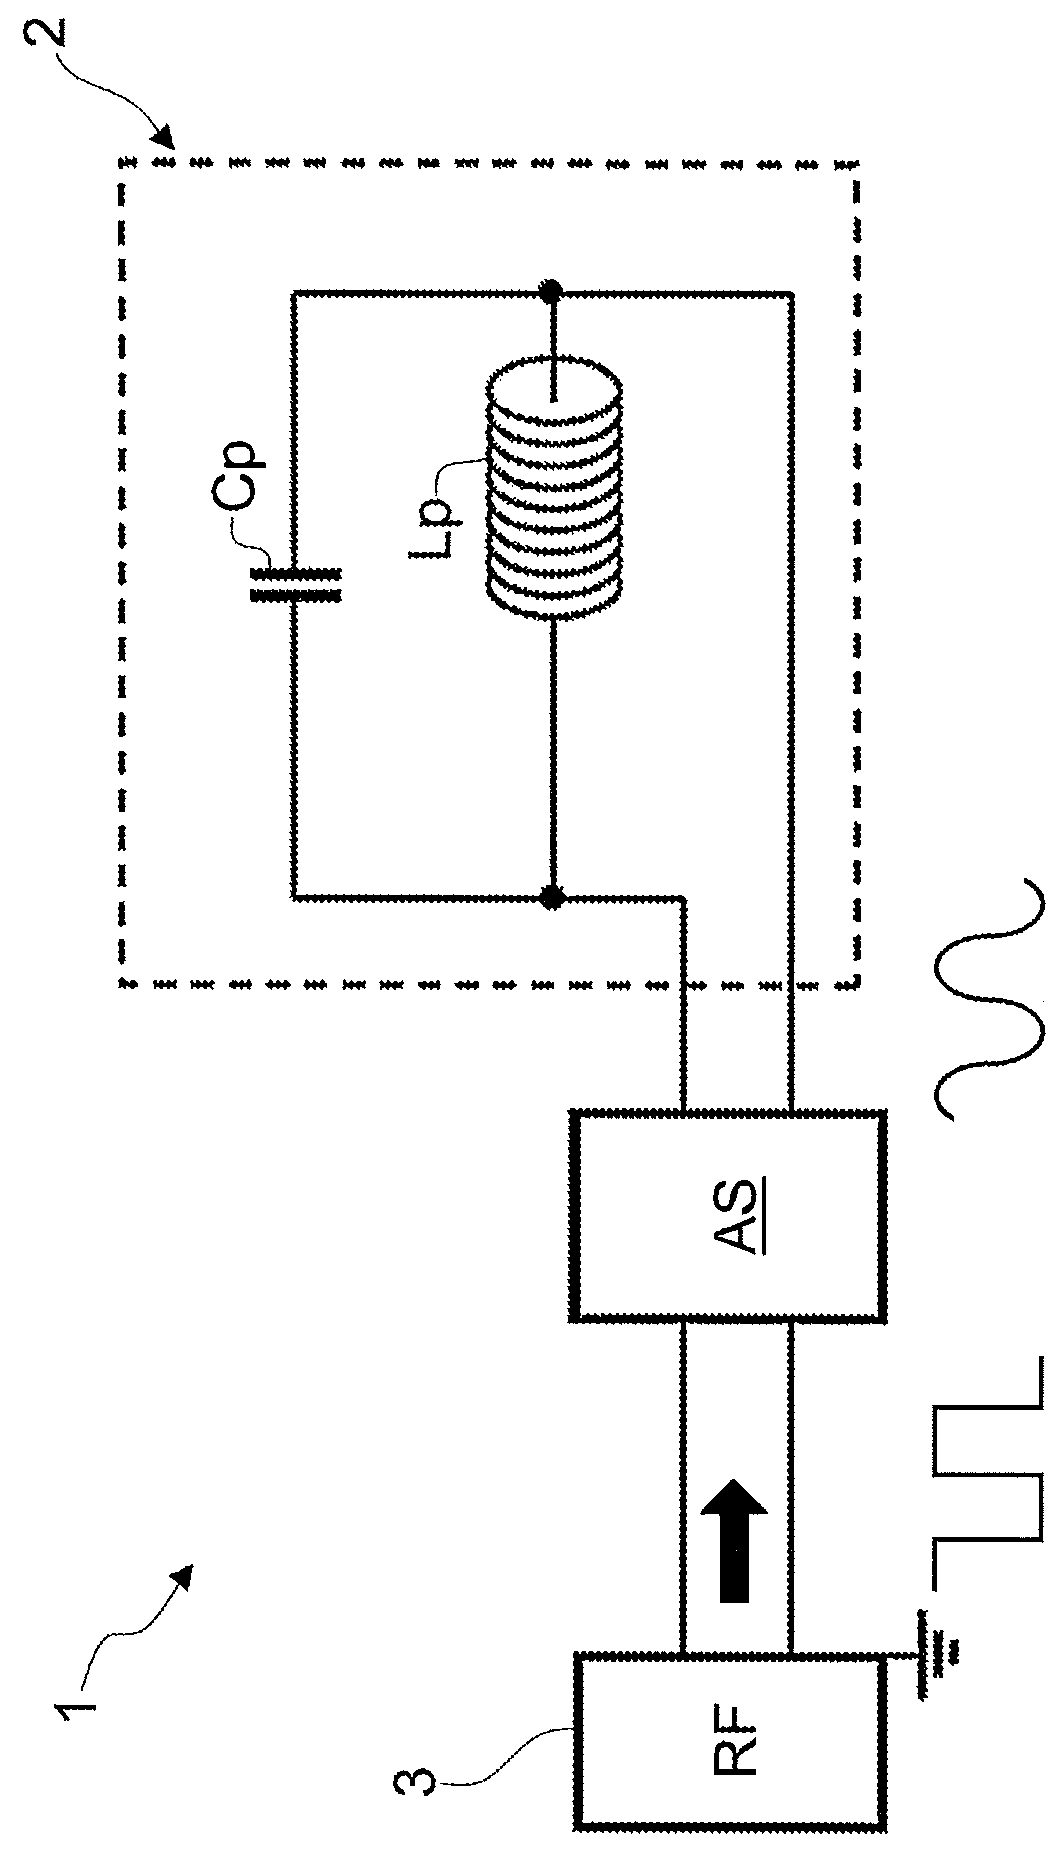 A device intrinsically designed to resonate, suitable for RF power transfer as well as group including such device and usable for the production of plasma